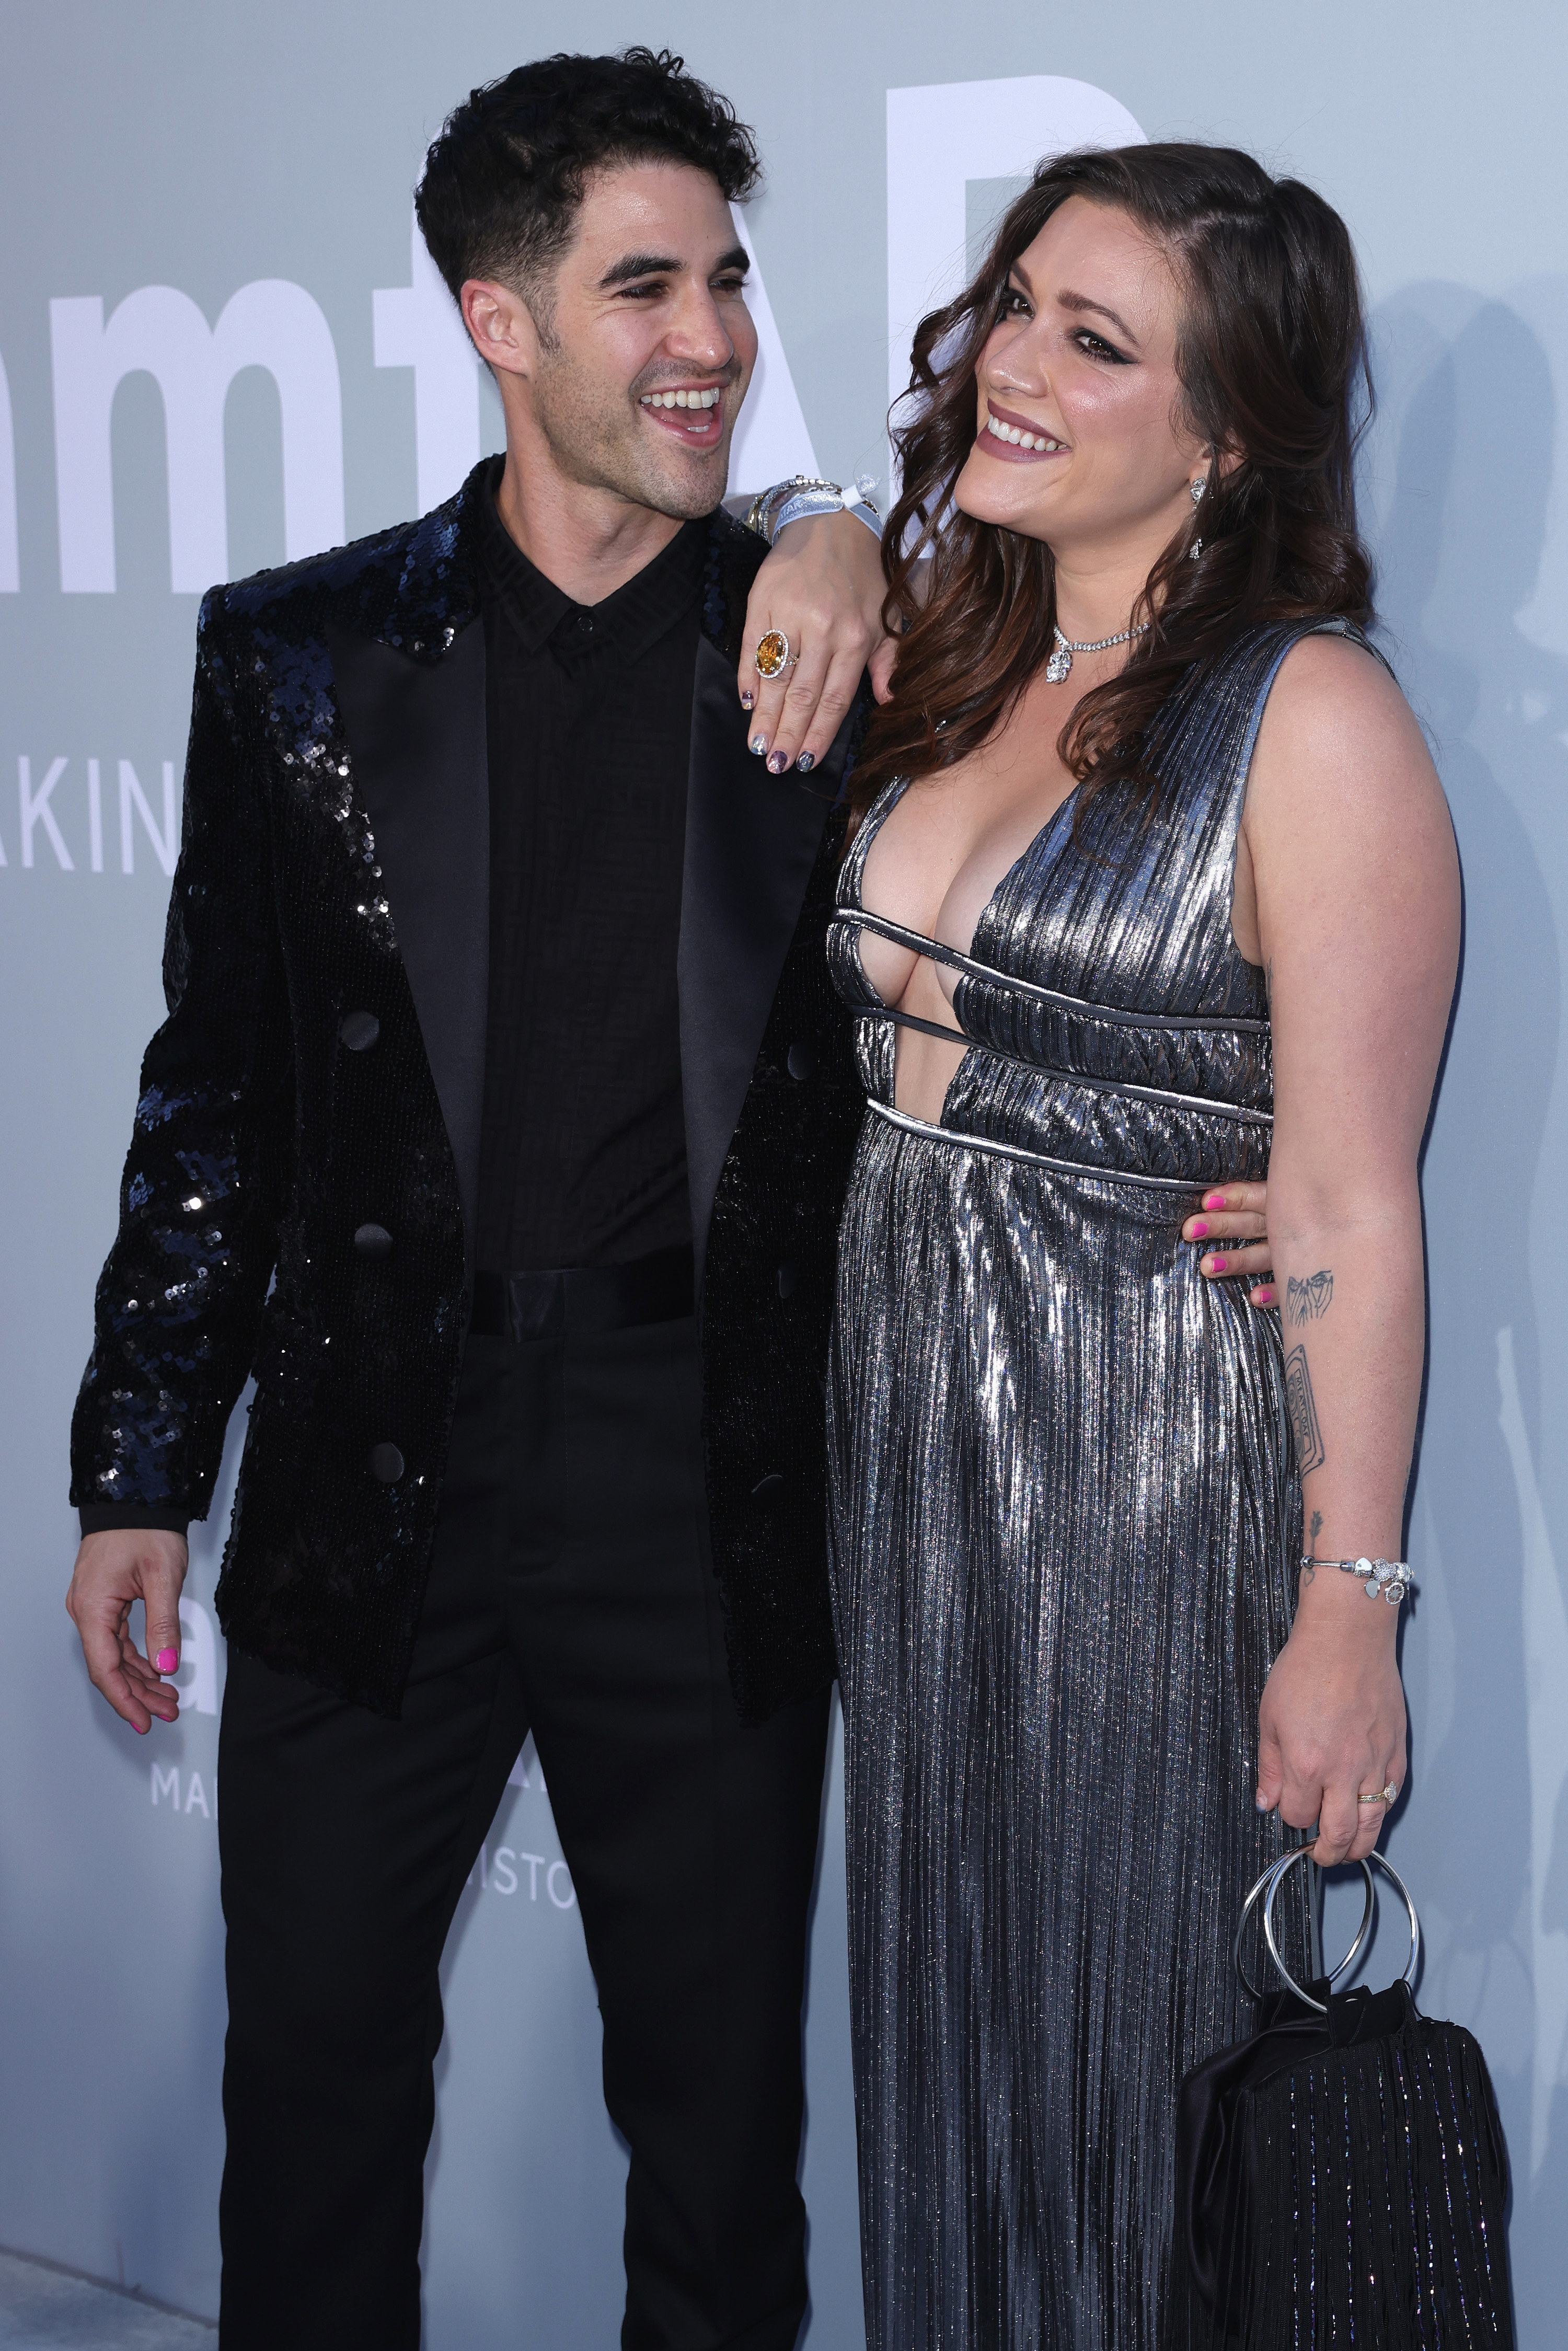 Darren Criss and Mia Swier pose at the amfAR Cannes Gala on July 16, 2021